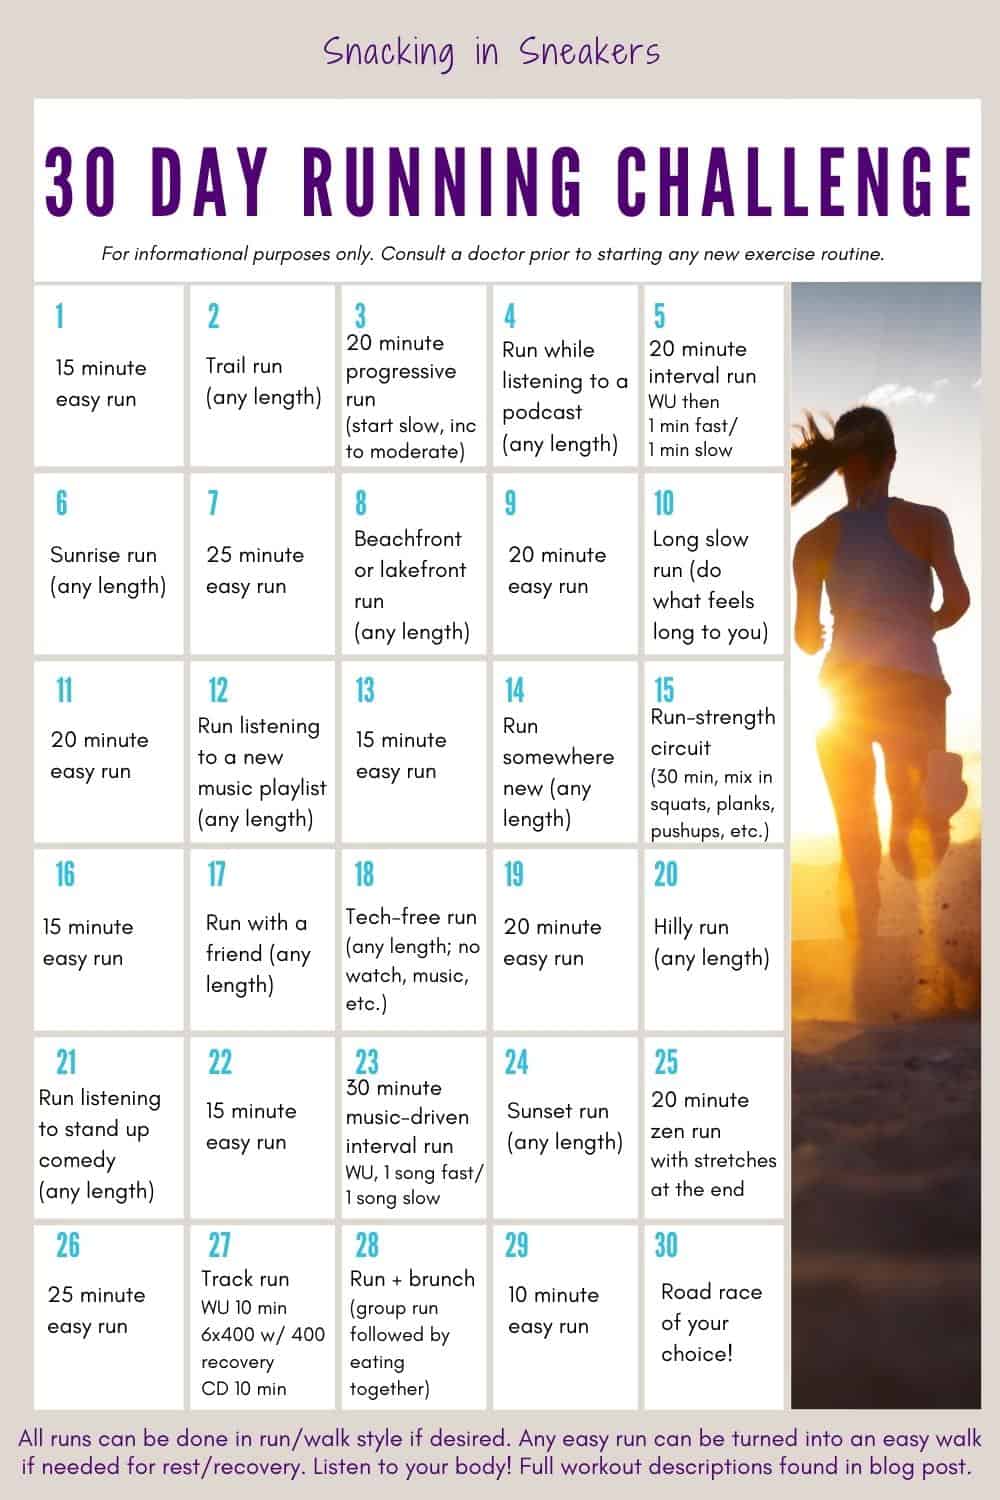 30 Day Running Challenge to Get You Motivated! - Snacking in Sneakers